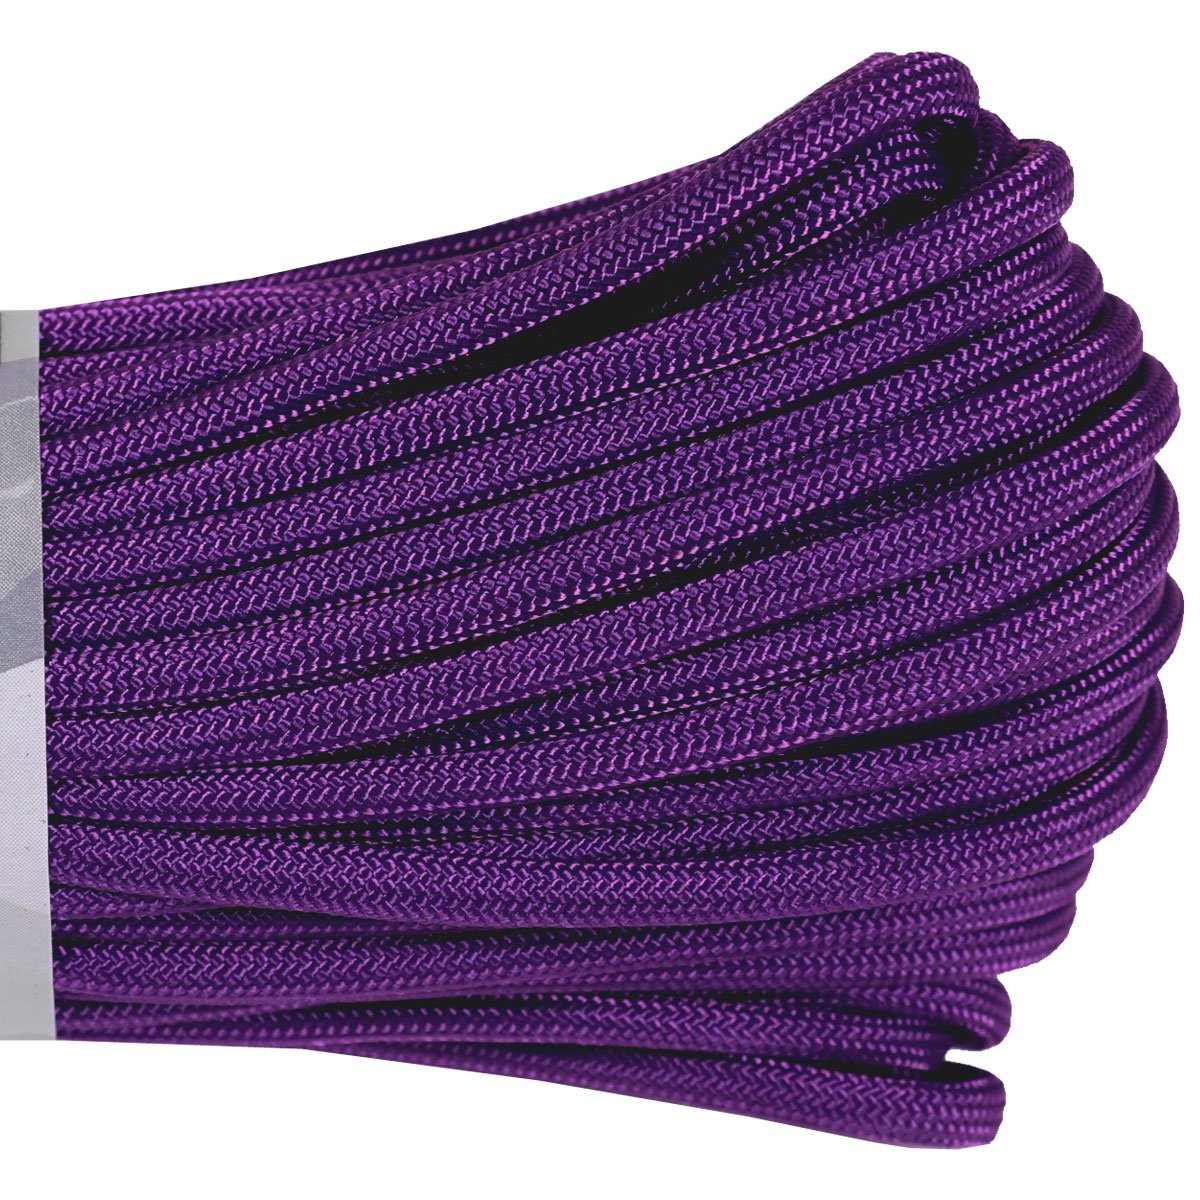 Atwood 550 Paracord - Purple